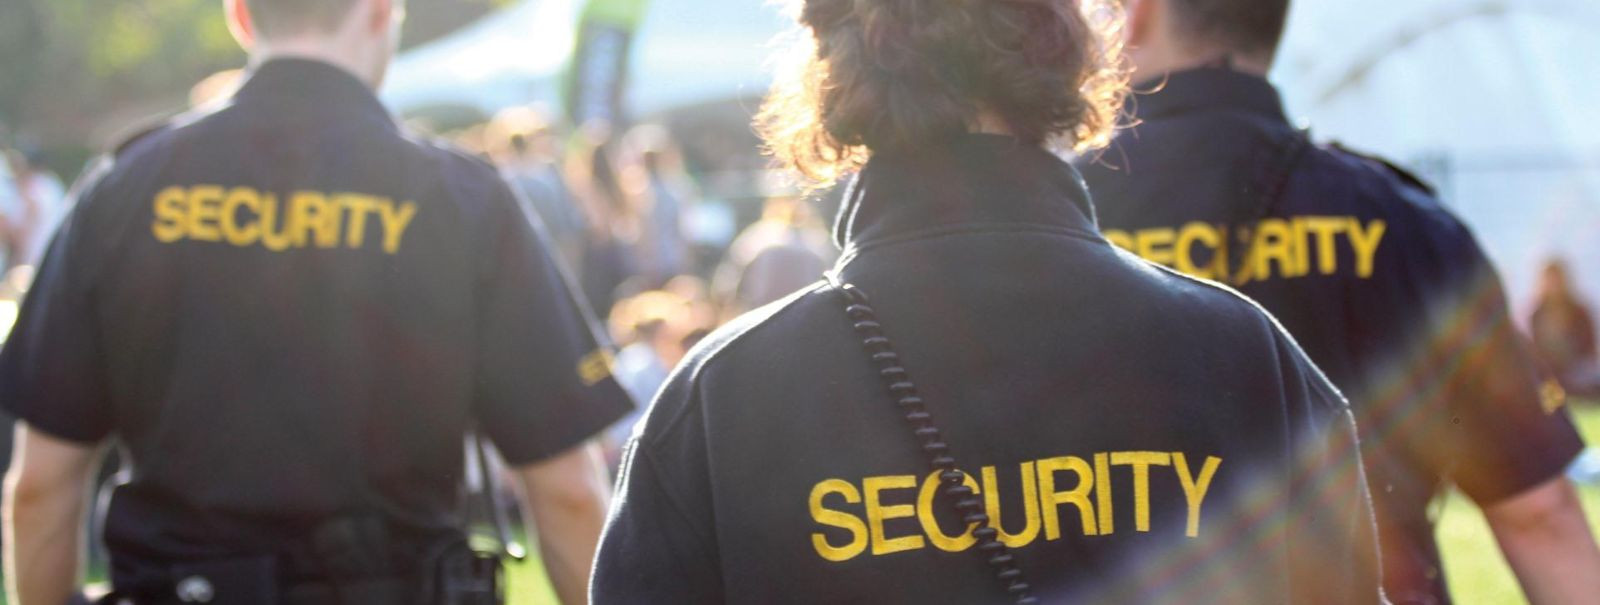 In today's world, safety and security are paramount concerns for businesses, event organizers, and individuals alike. Professional patrol services play a critic